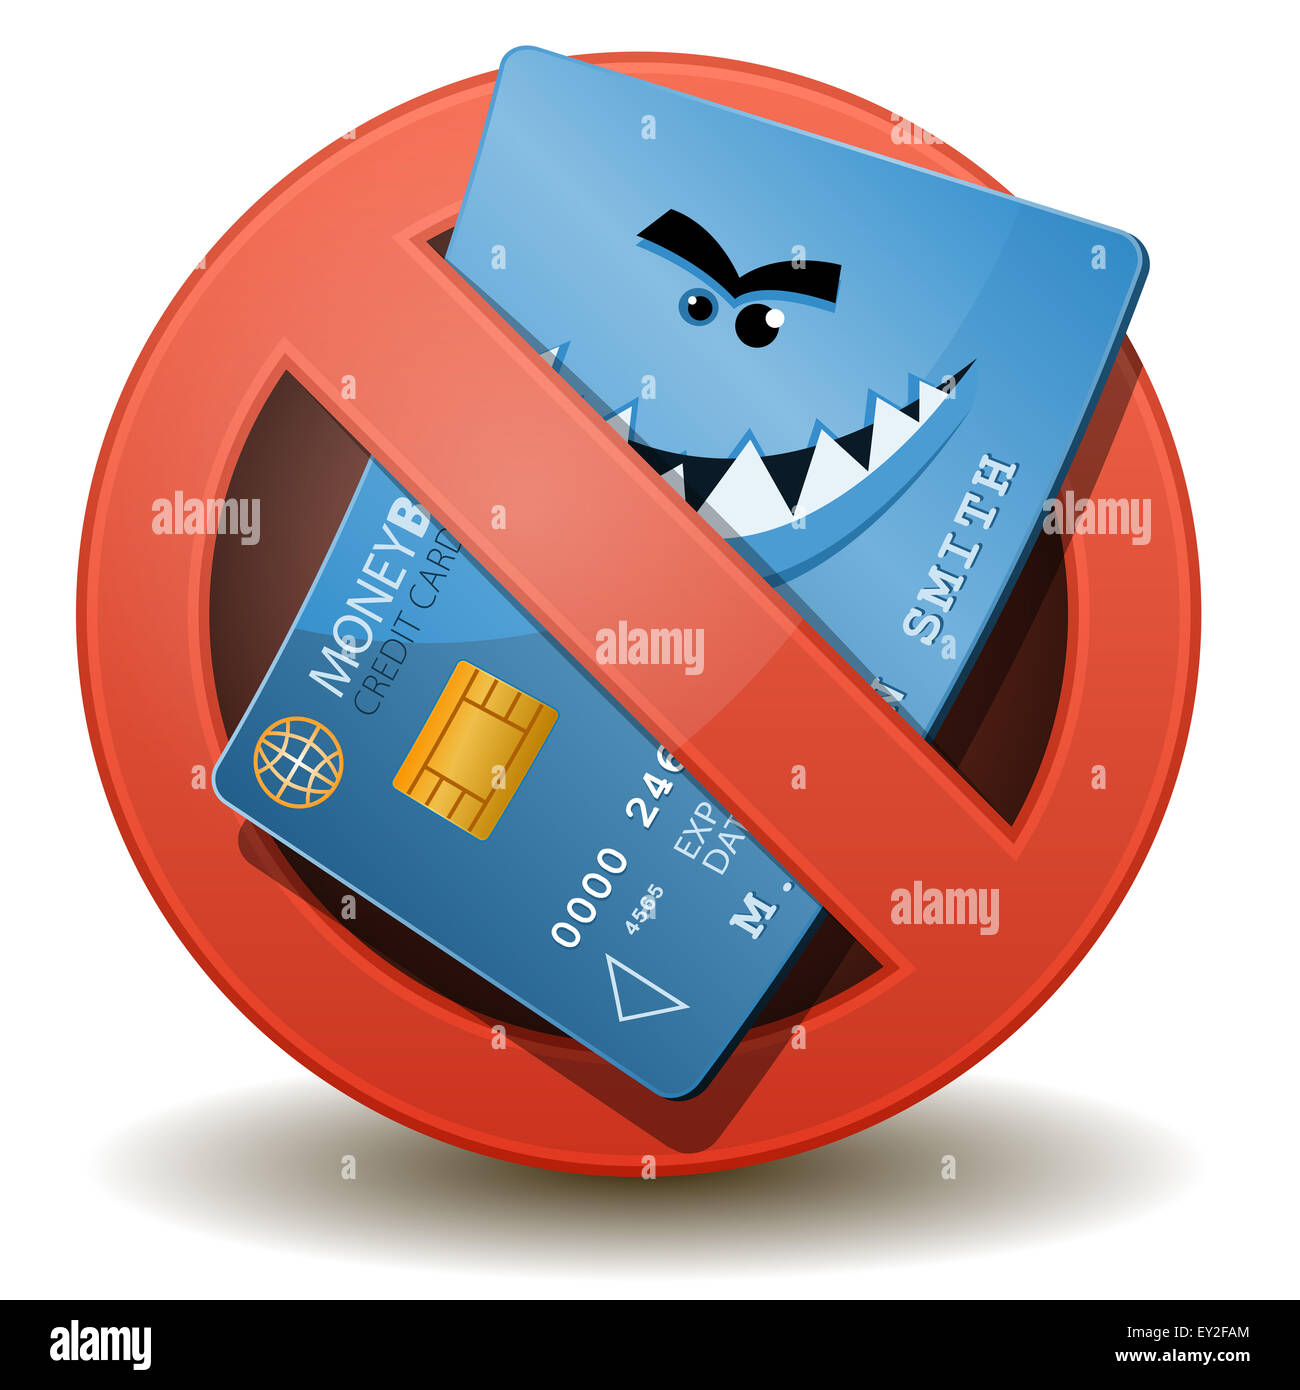 Illustration of a cartoon wicked credit card character inside a forbidden sign icon Stock Photo